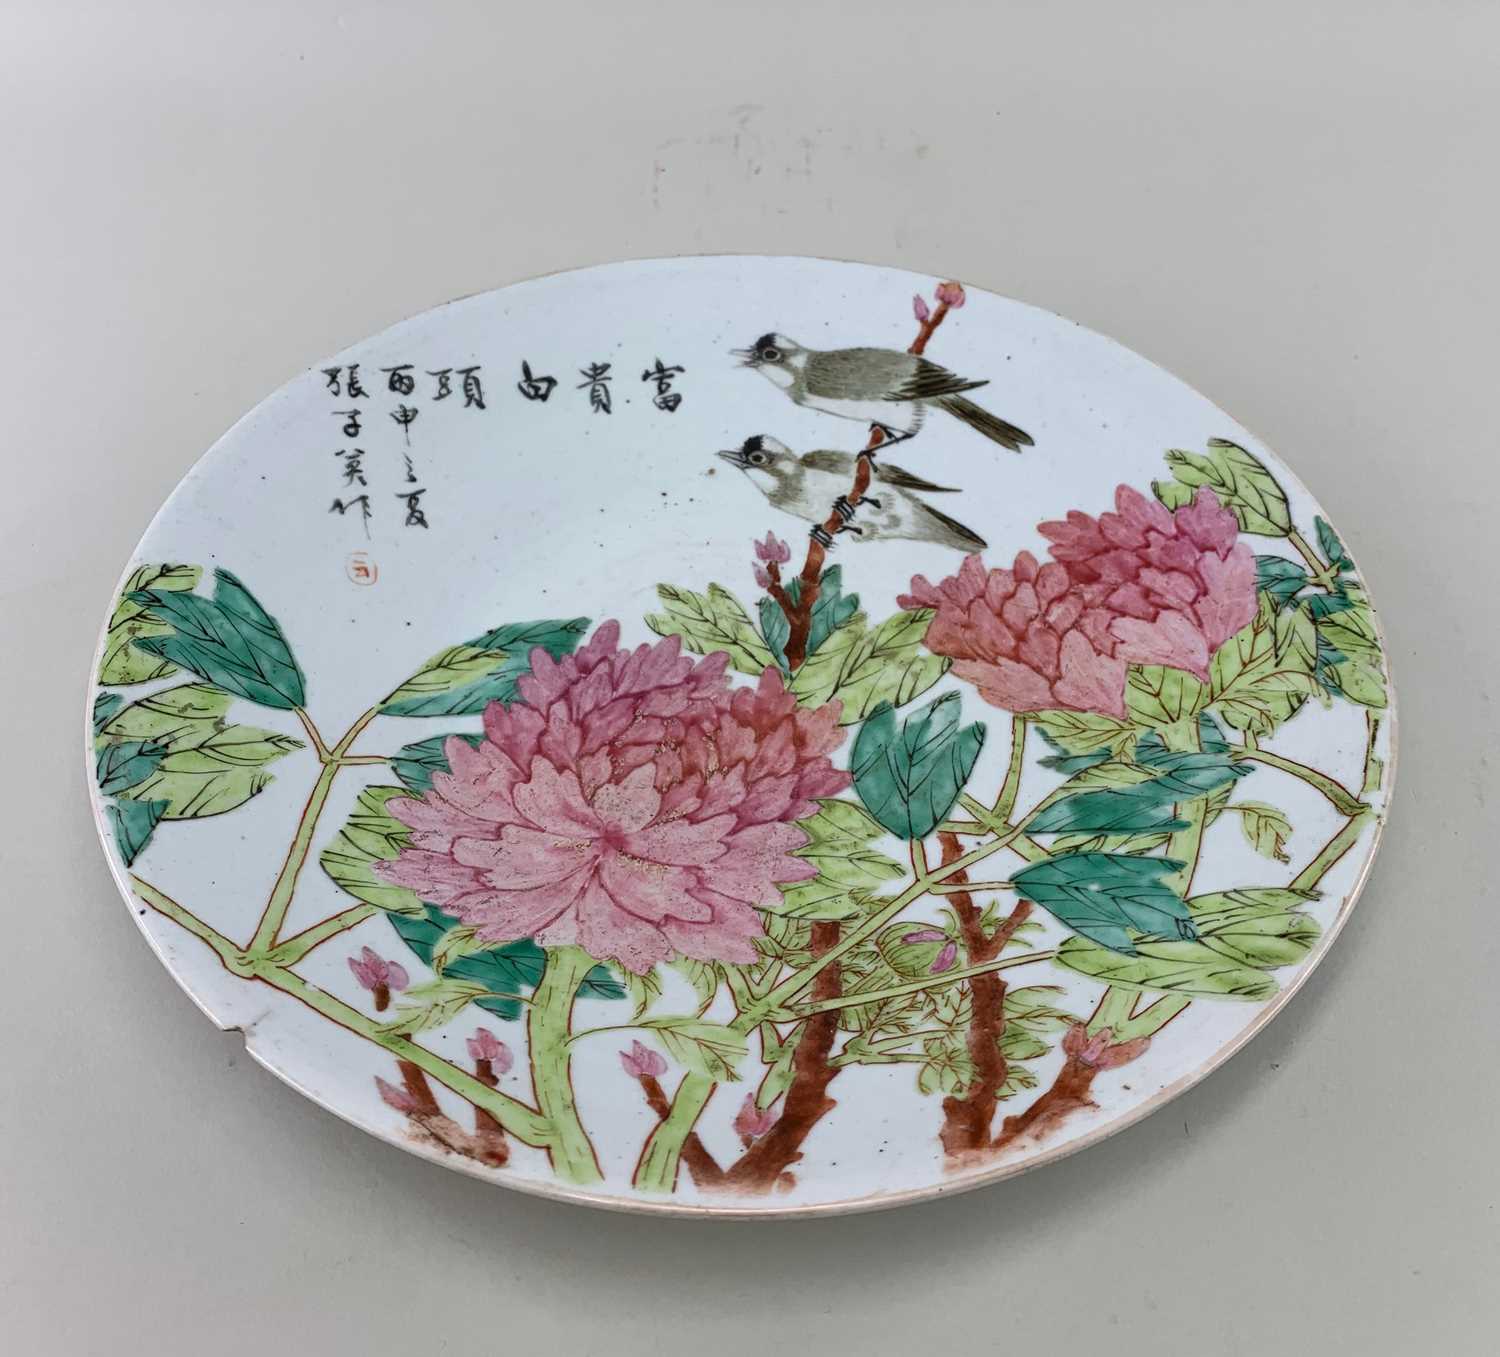 PROVINCIAL CHINESE FAMILLE ROSE PORCELAIN DISH, Republic or later, painted with two song birds - Image 2 of 4